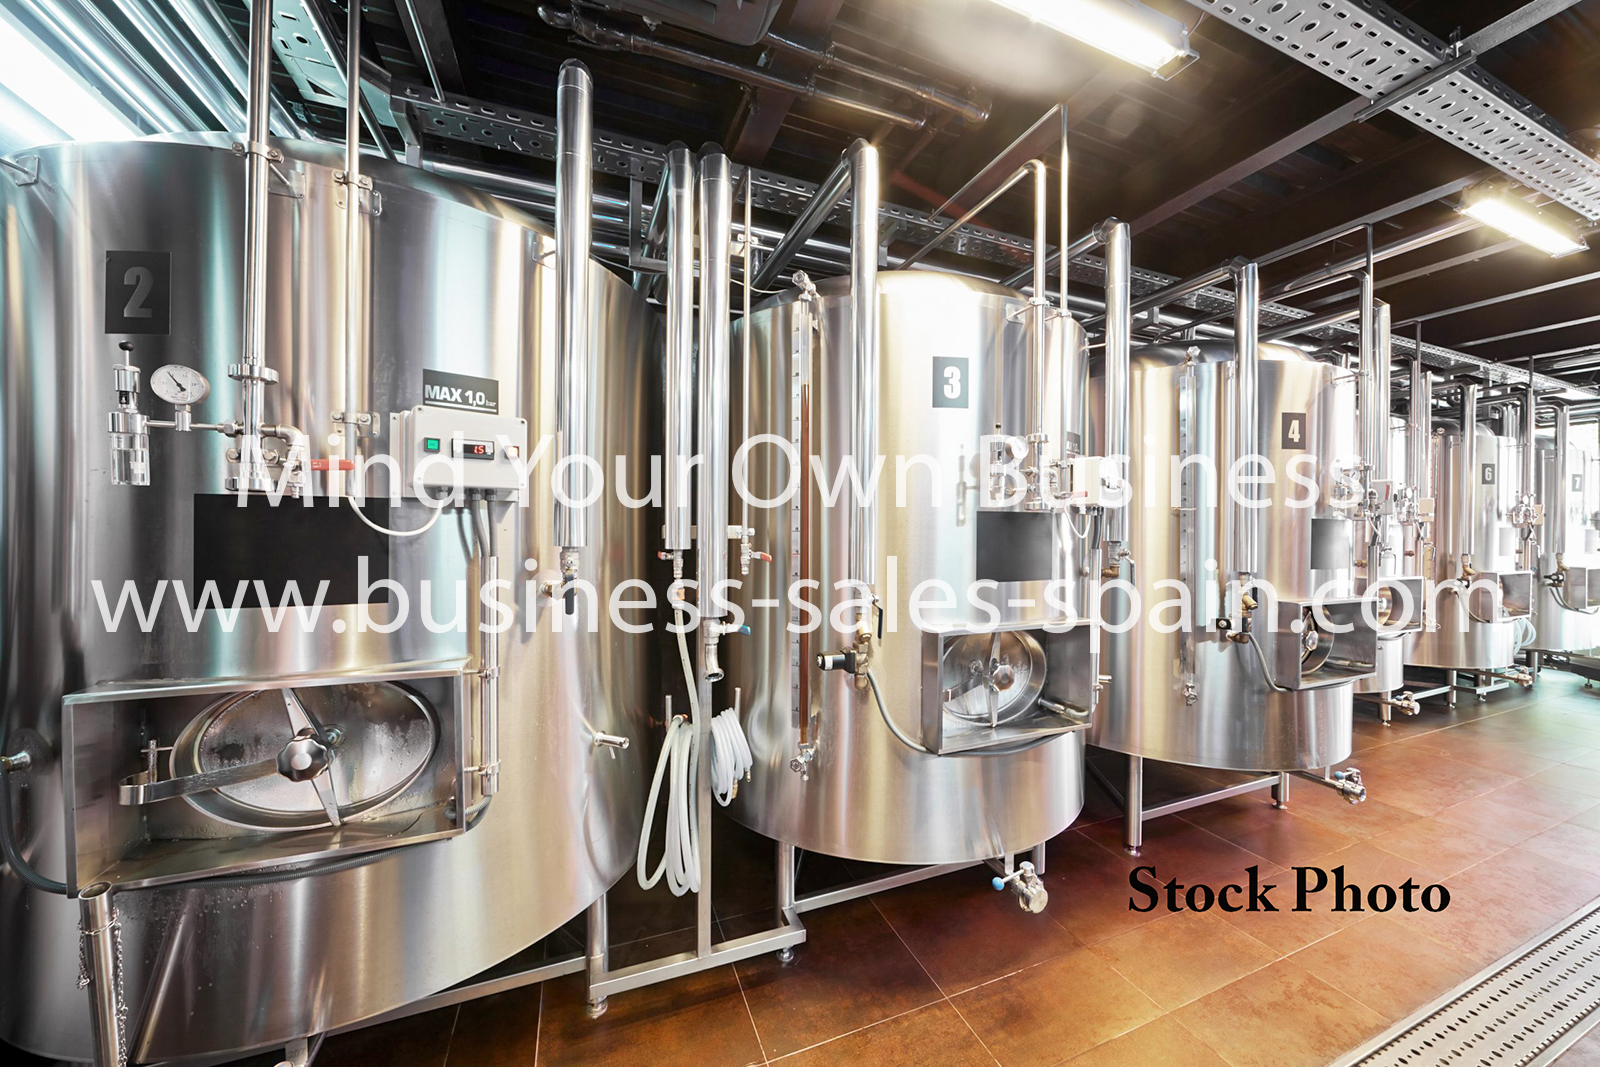 Recently Conceived Craft Brewery Located in Industrial Estate Close to Road Network